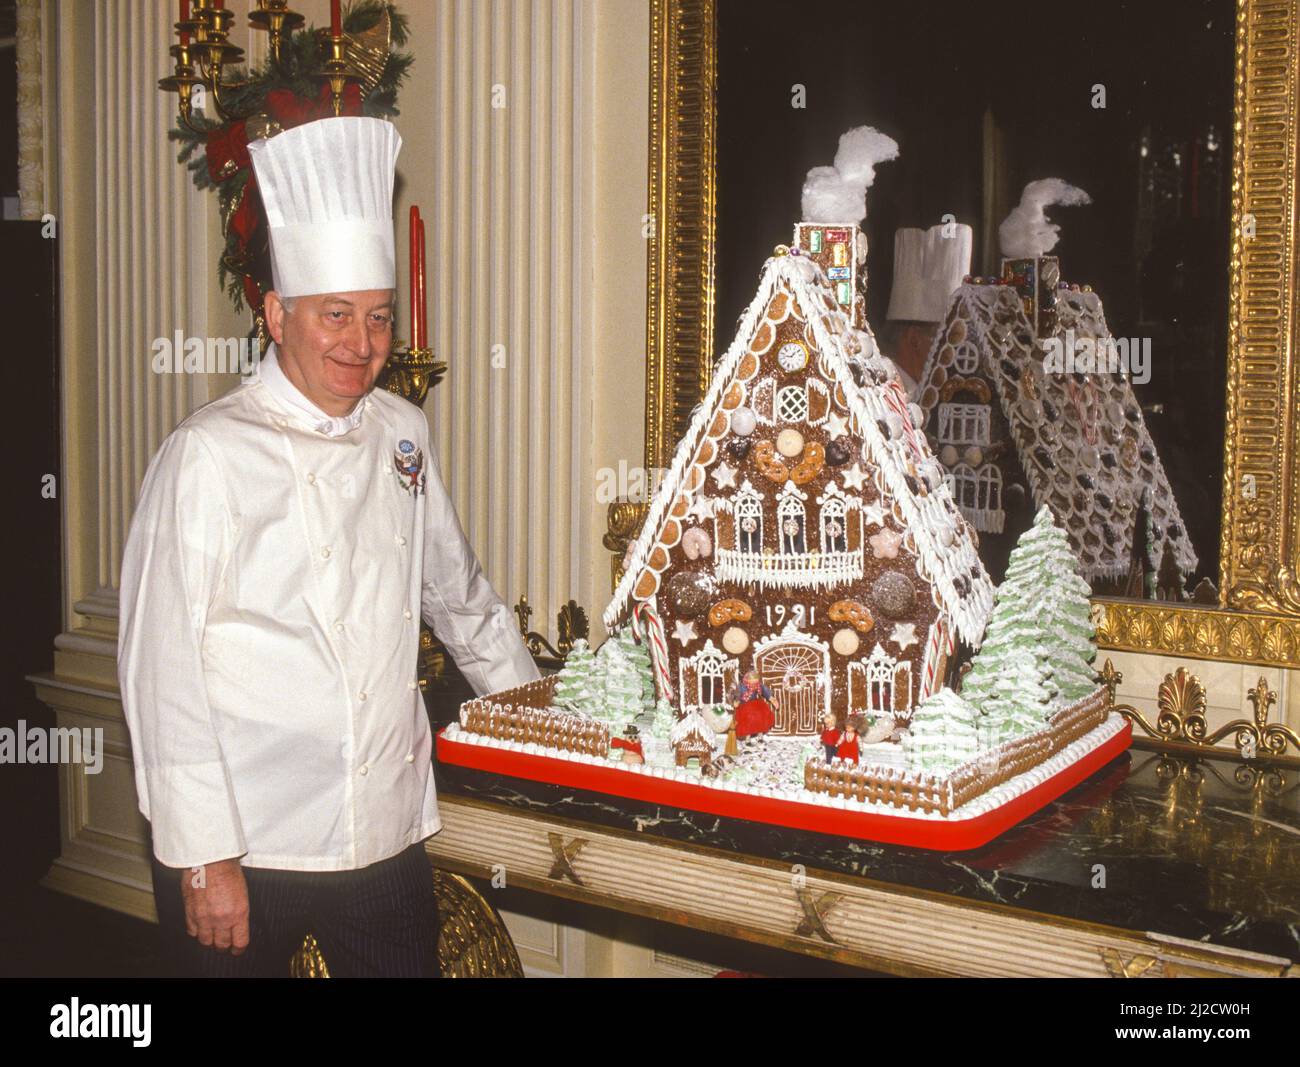 WASHINGTON, DC, USA - White House Executive Chef Hans Raffert with 1991 Christmas holiday gingerbread house at White House, December 9, 1991. Stock Photo